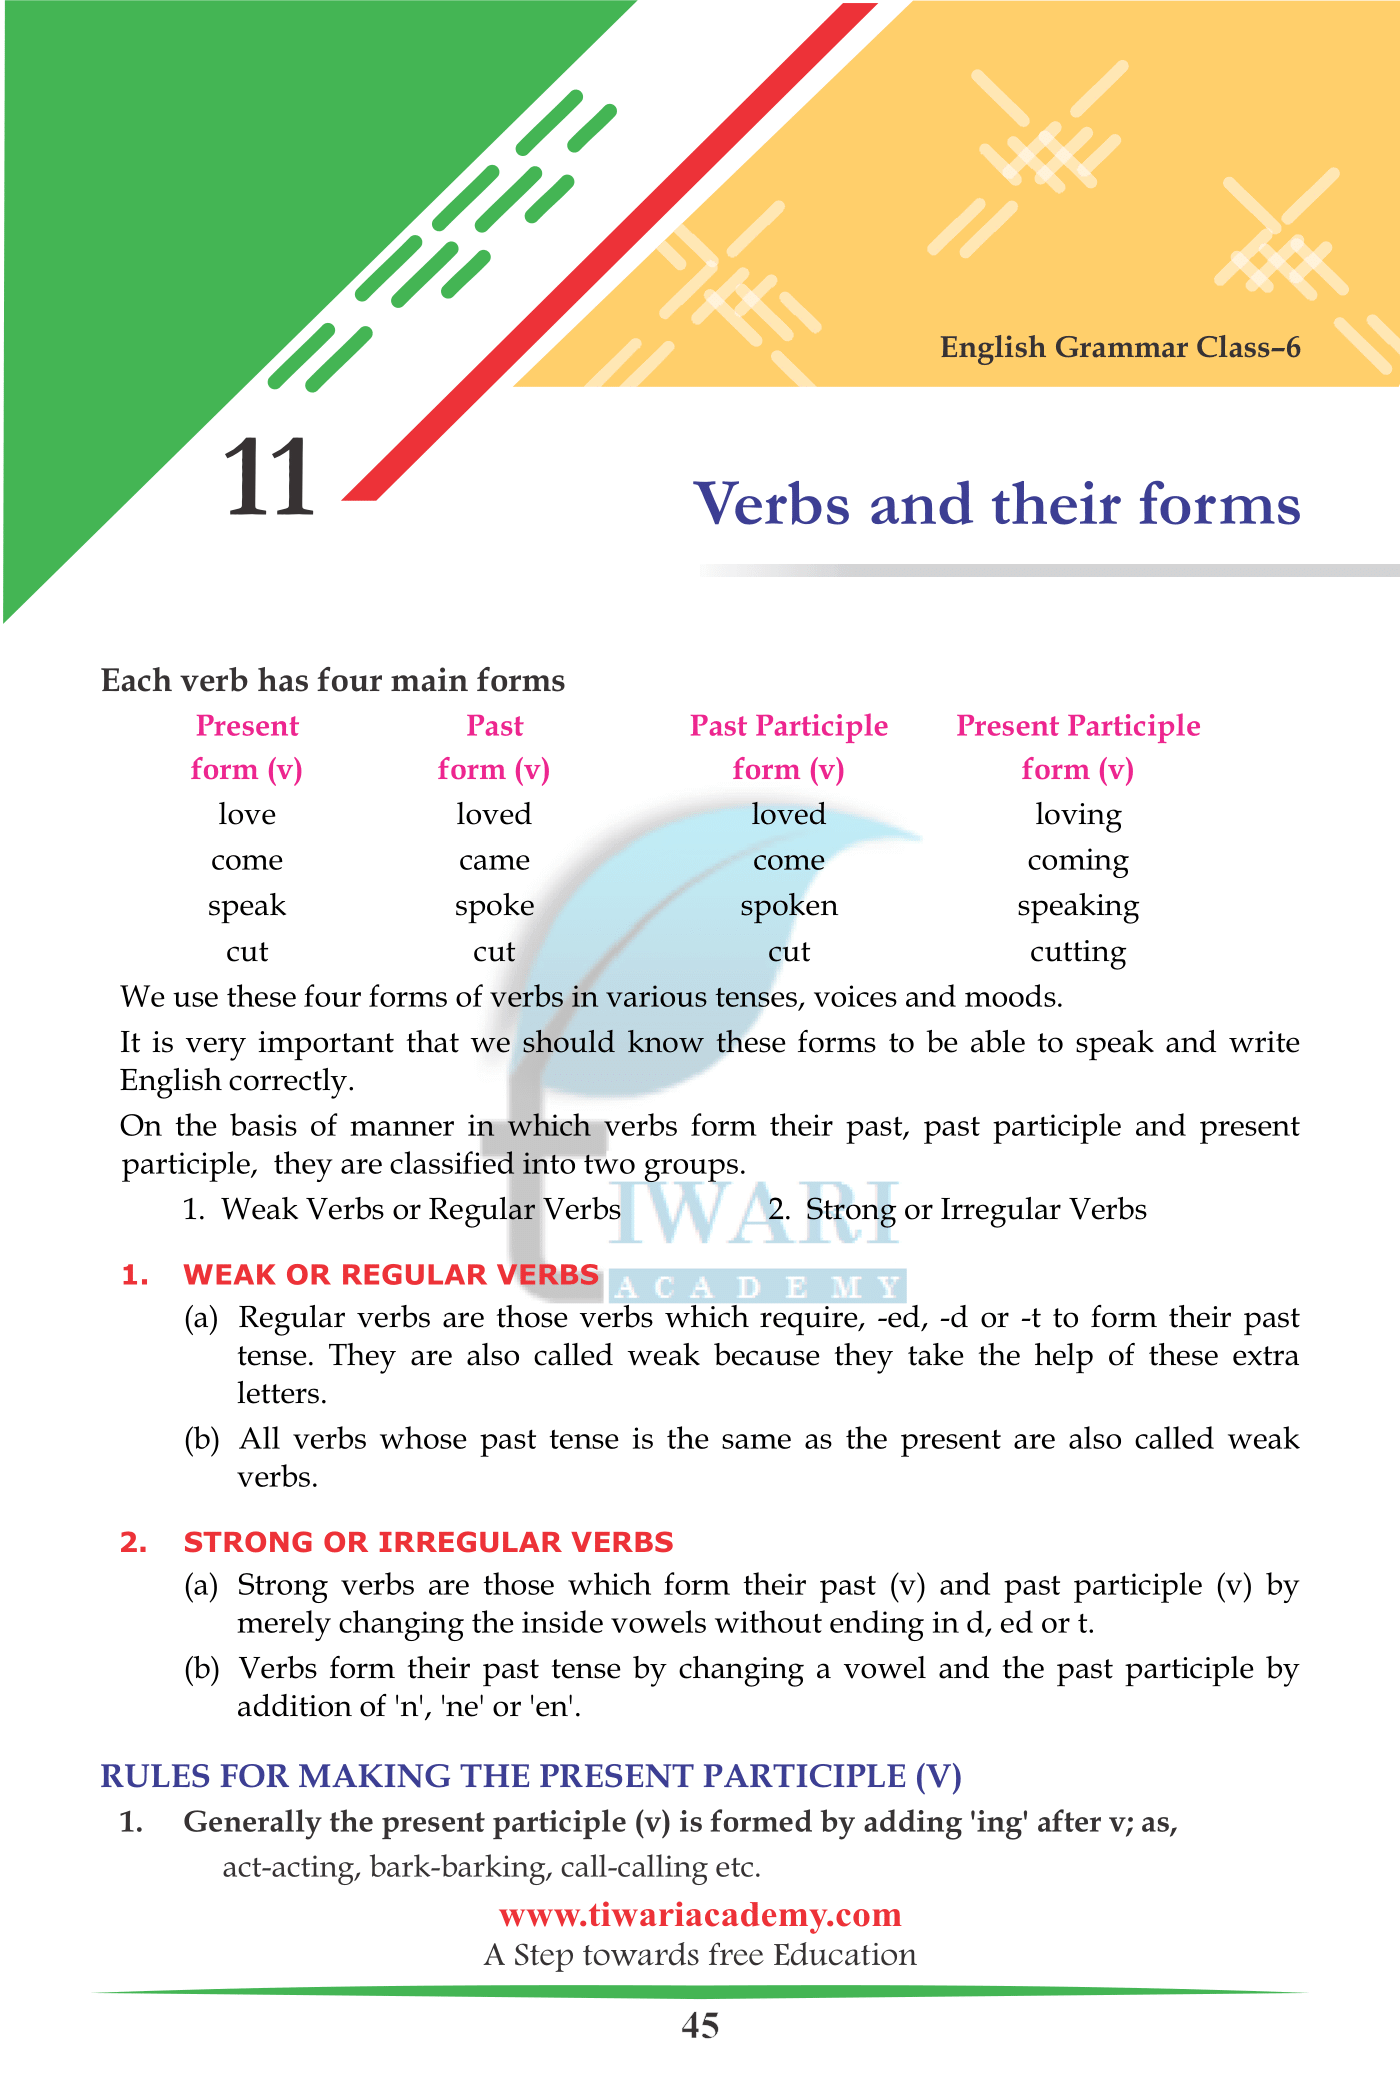 Class 6 English Grammar Chapter 11: Verbs and Their Forms